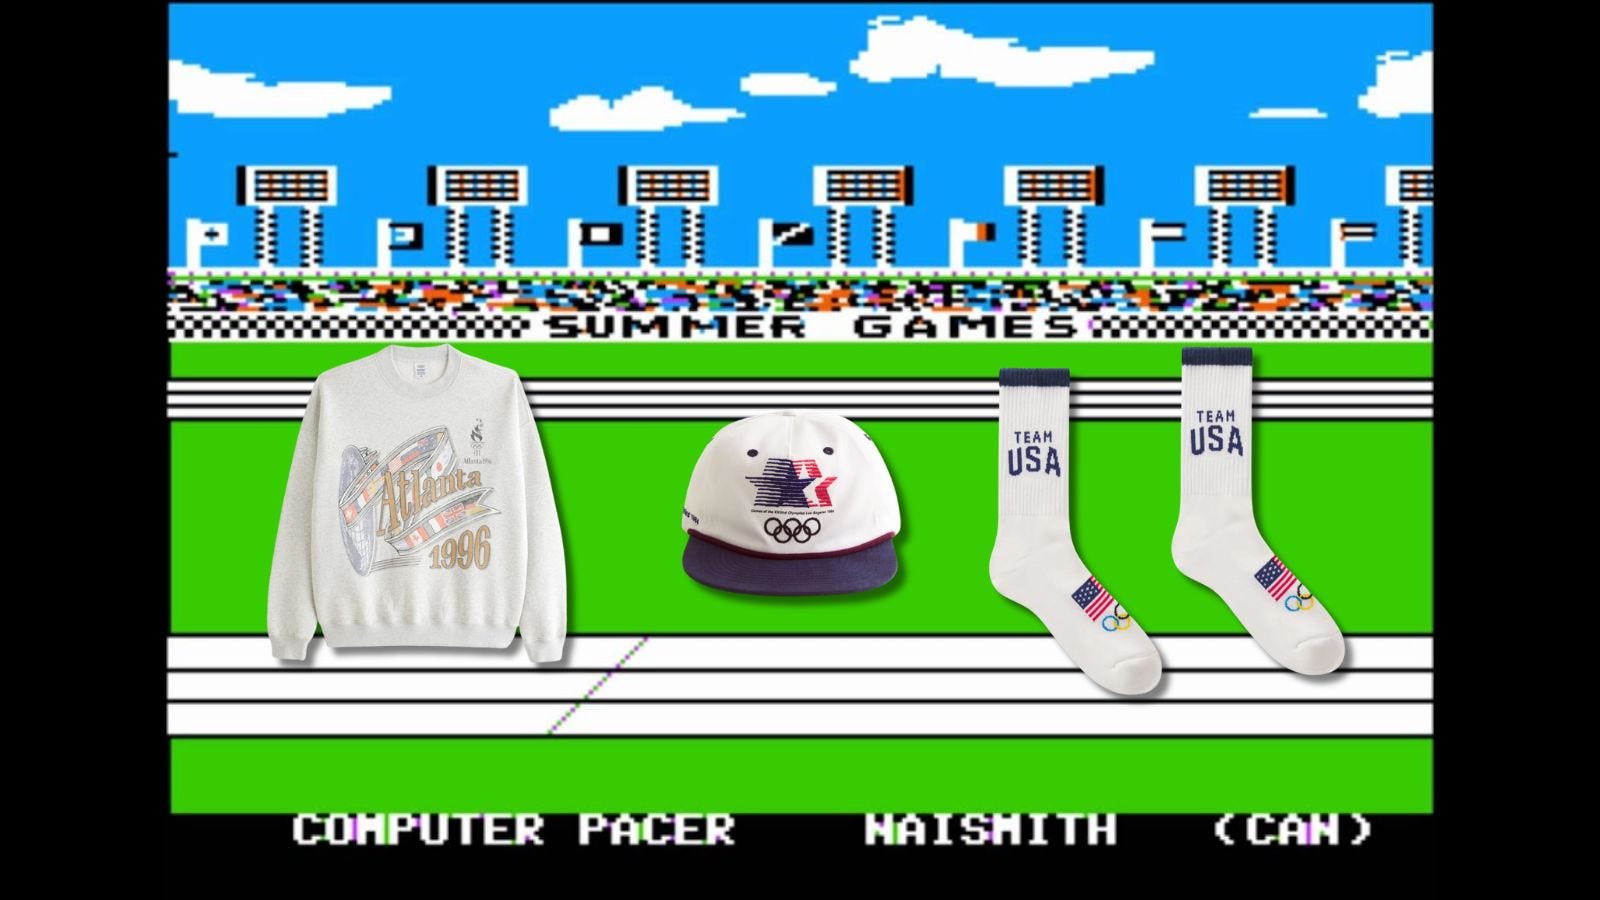 men's olympics sweatshirt, hat, and socks, set against the background of the summer olympics Apple IIe computer game